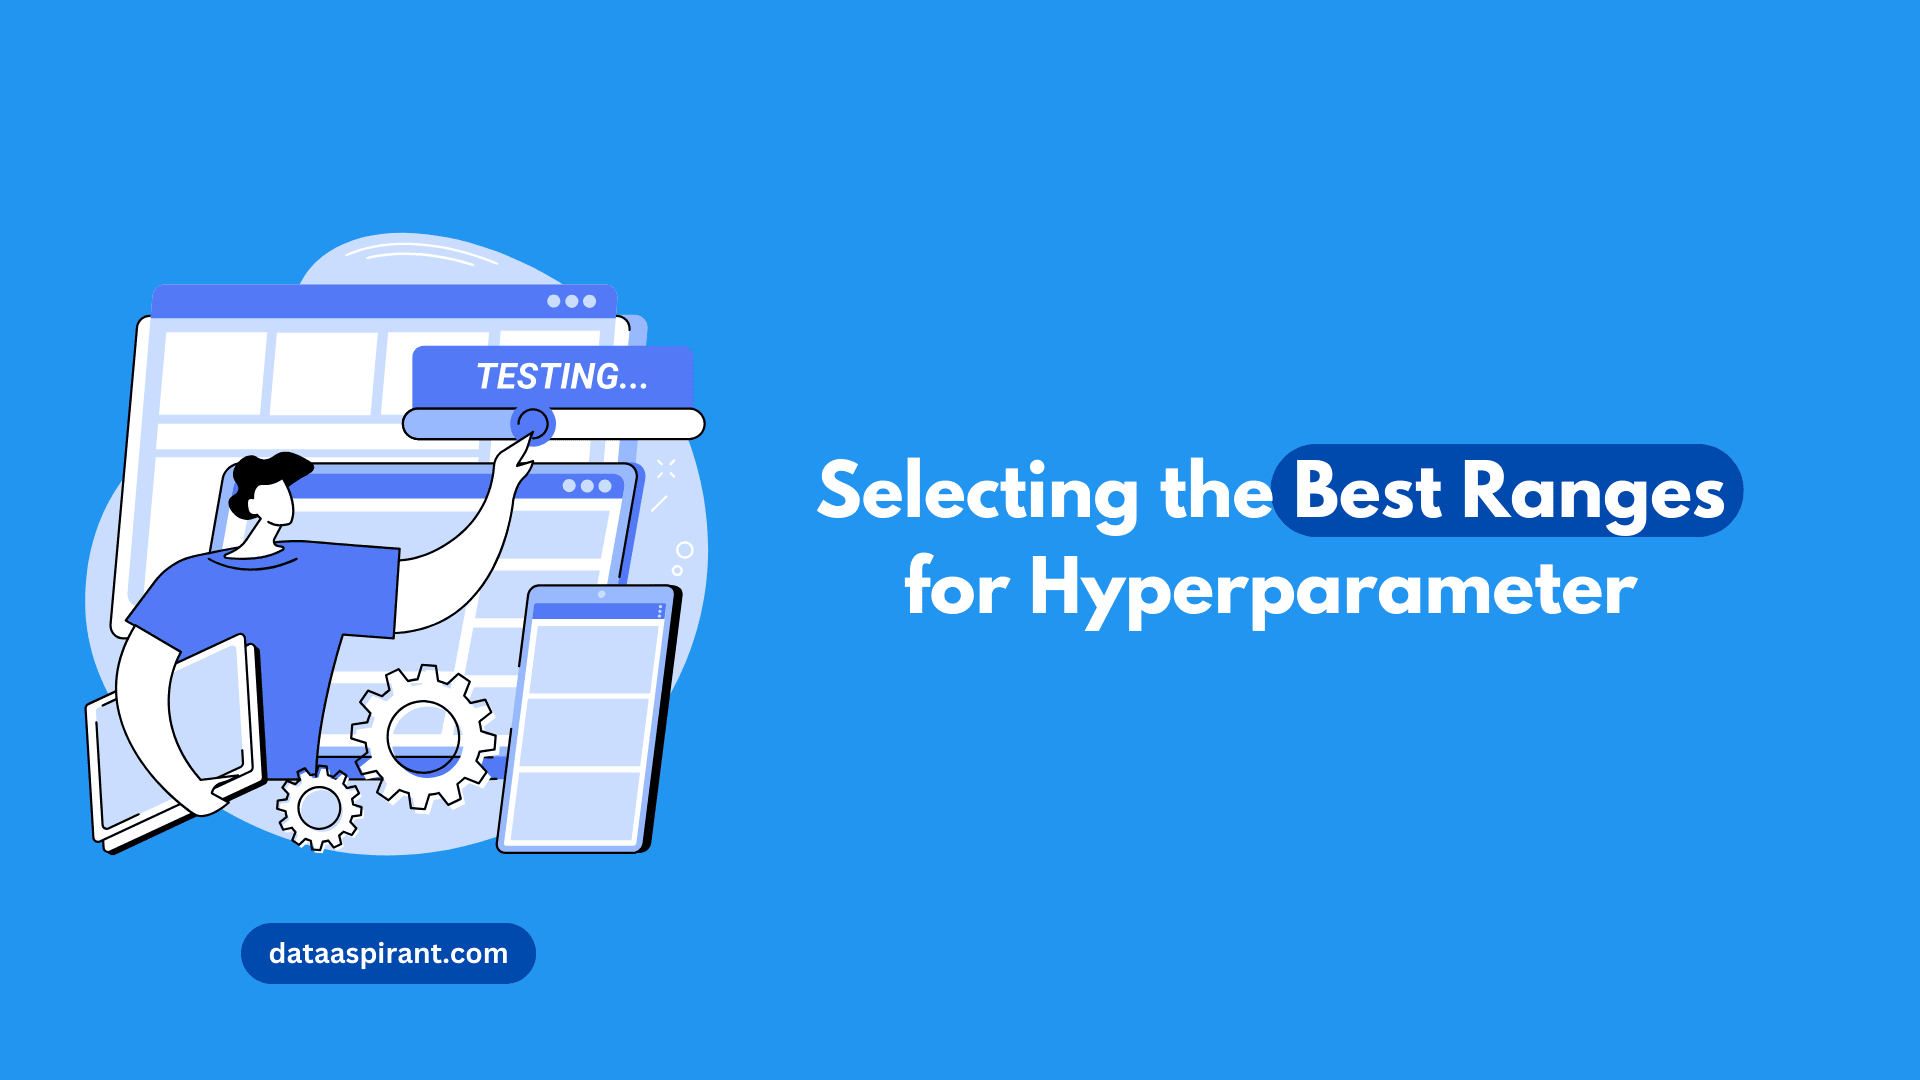 How to select the best ranges for the Hyperparamters